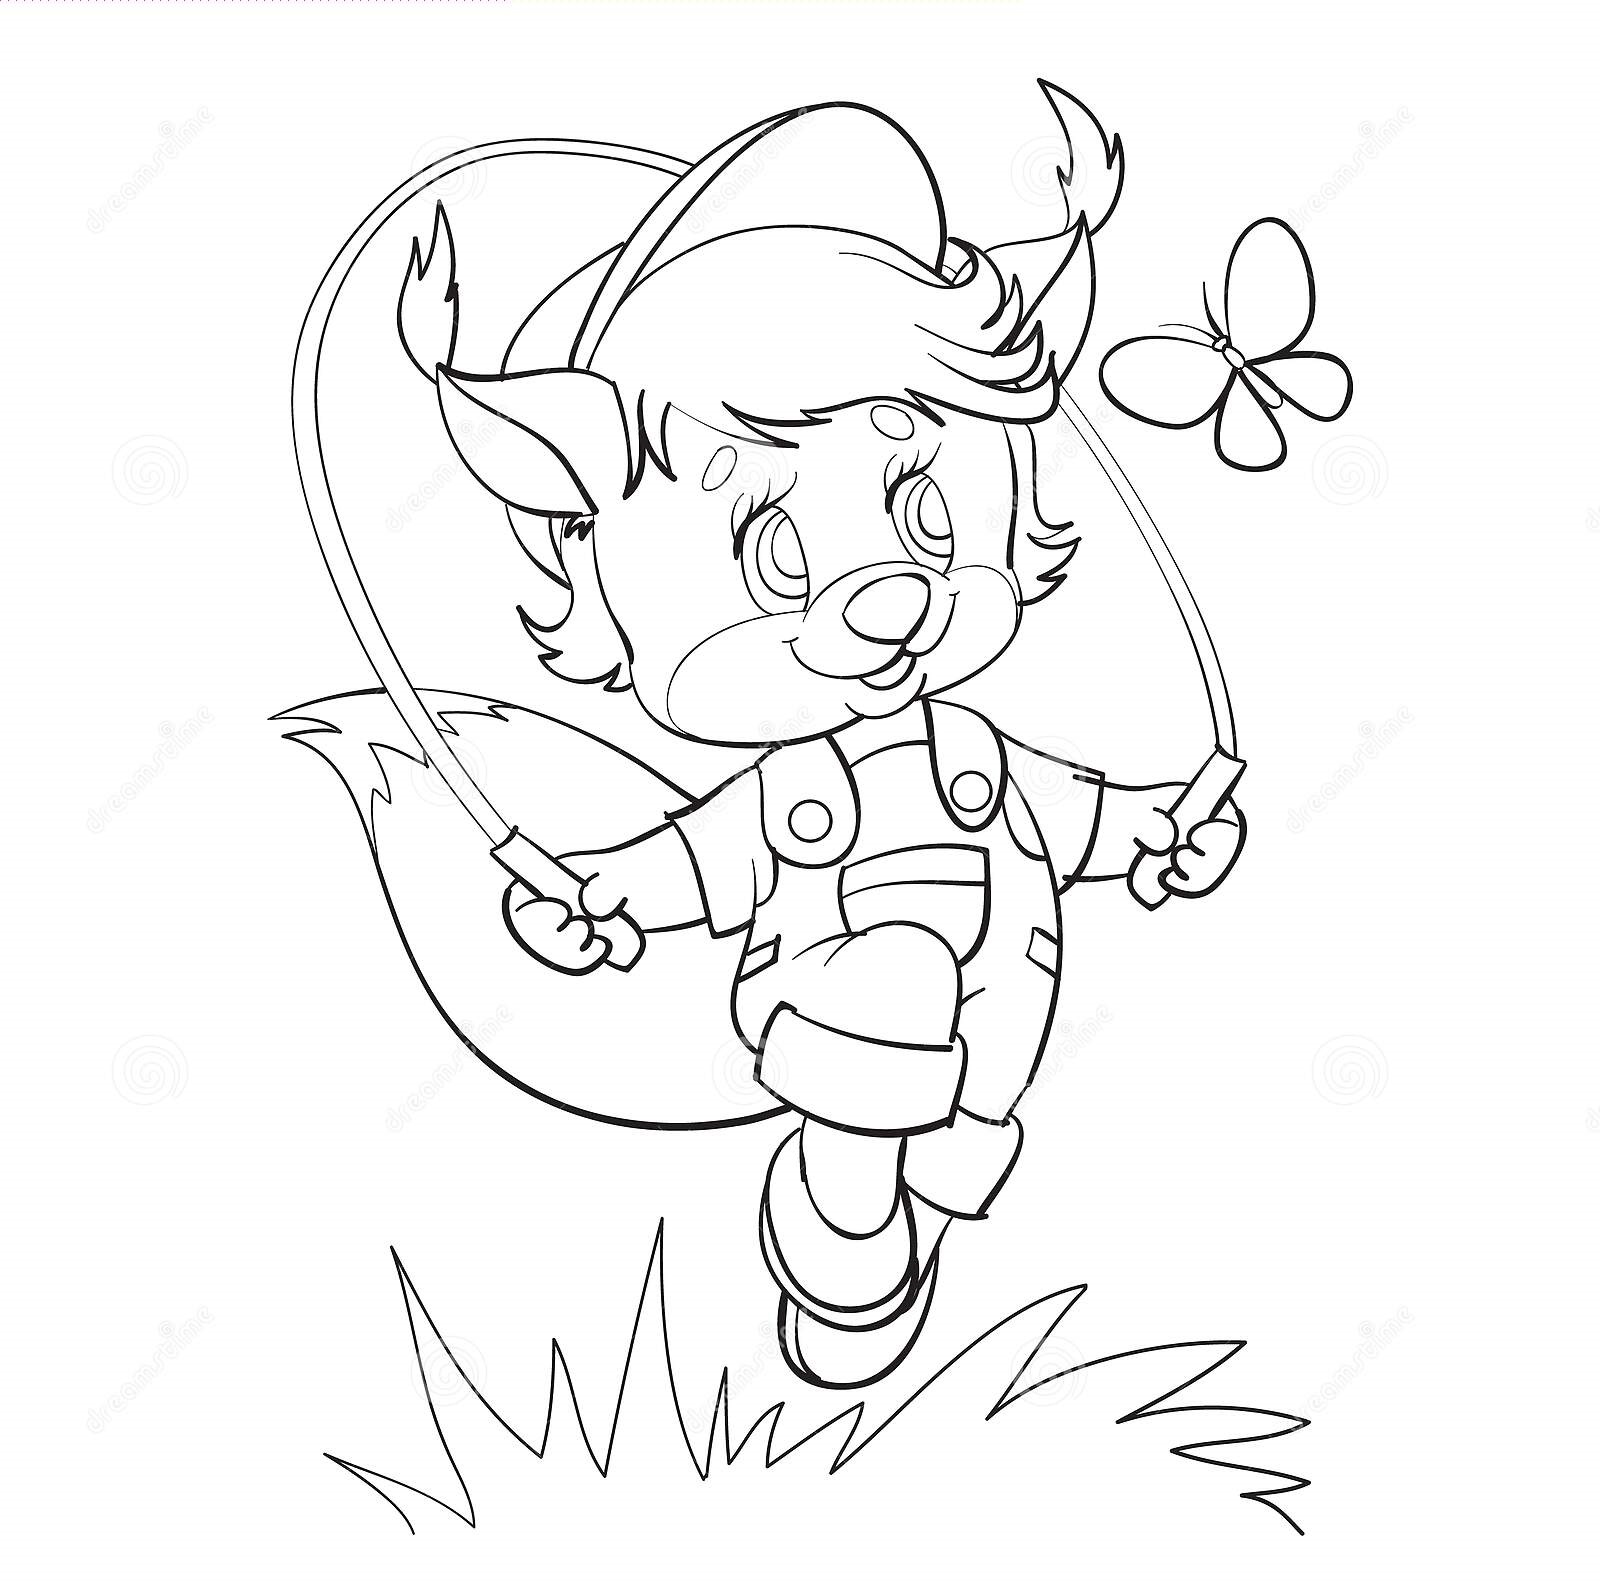 Sketch Of A Squirrel Character Who Jumps Over A Rope